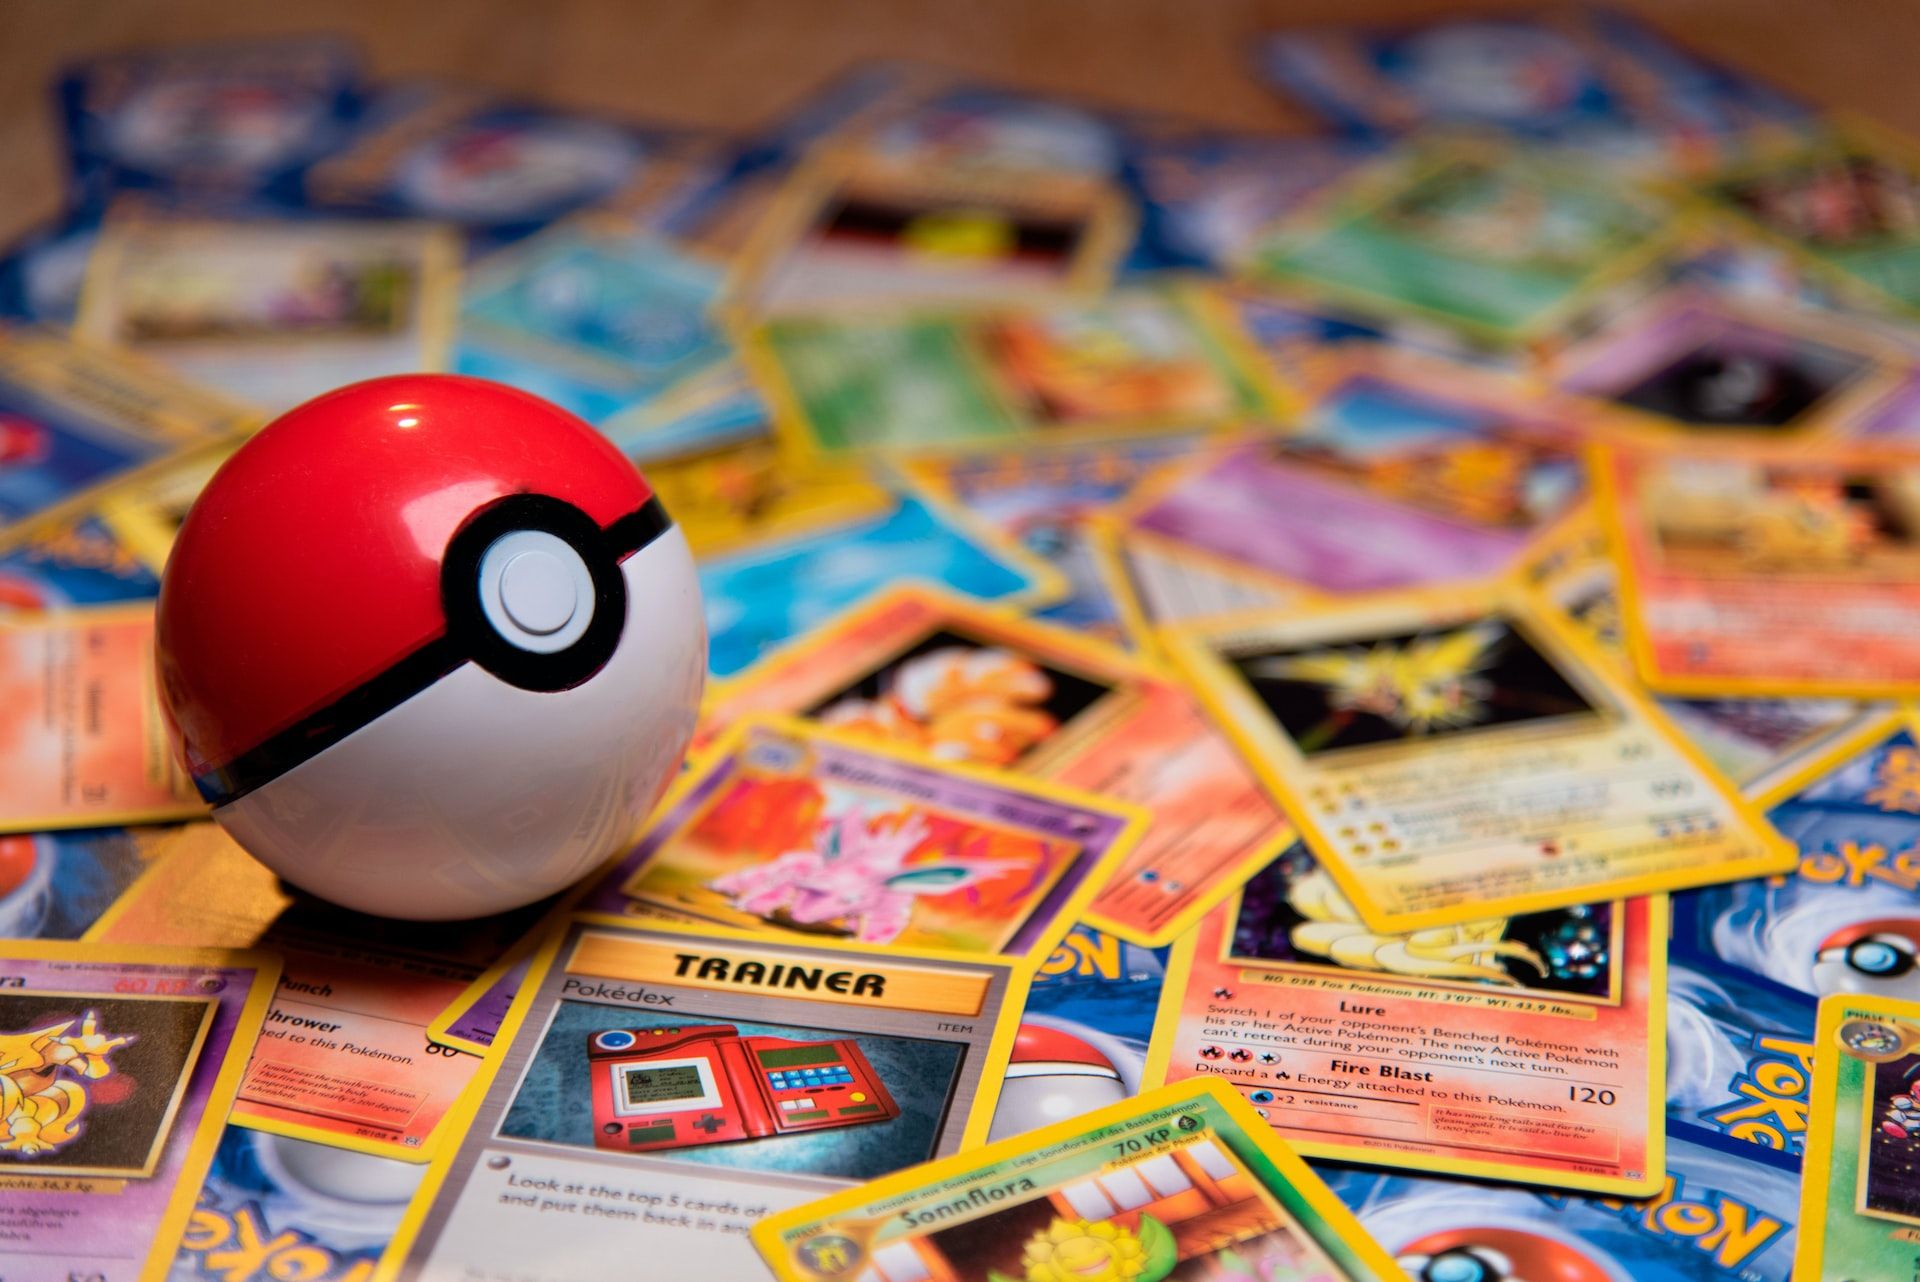 The 25 Most Valuable Pokémon Cards In Sword/Shield Lost Origin